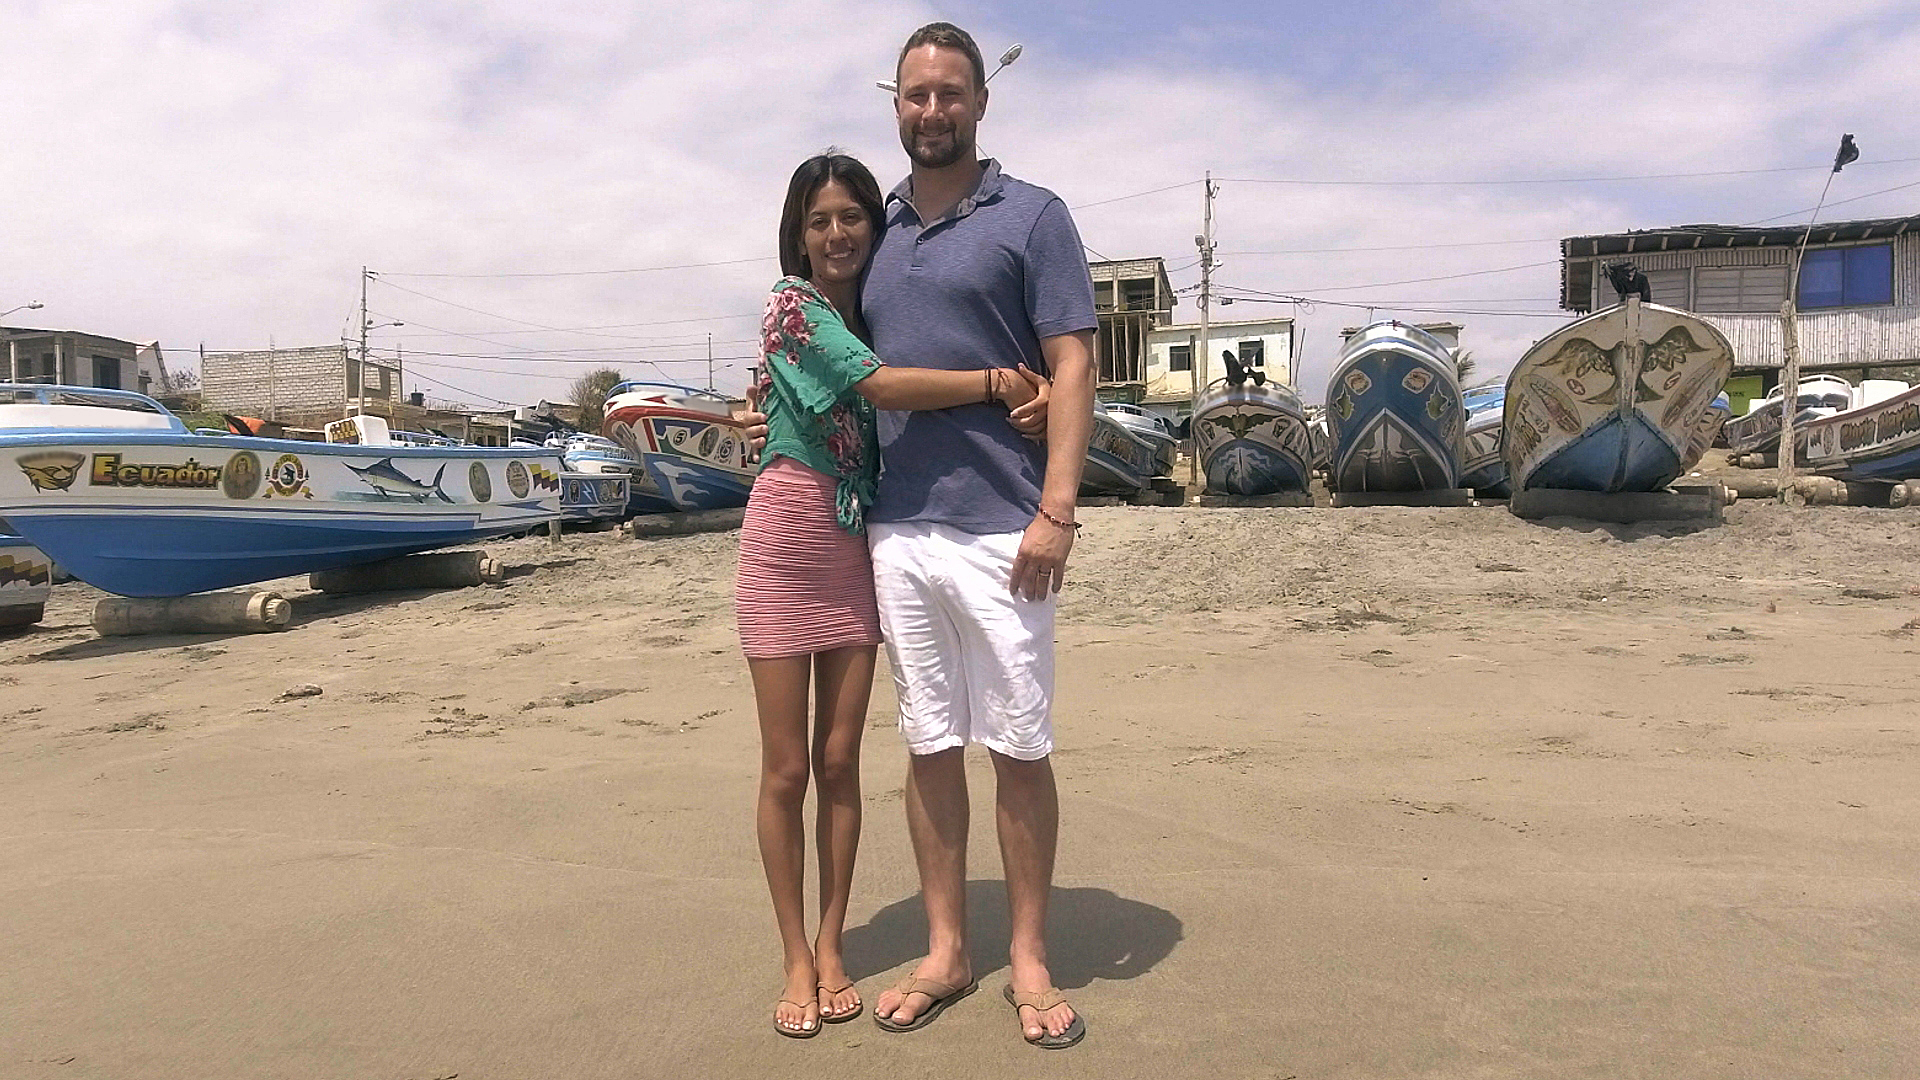 90 days fiance the other way watch online.